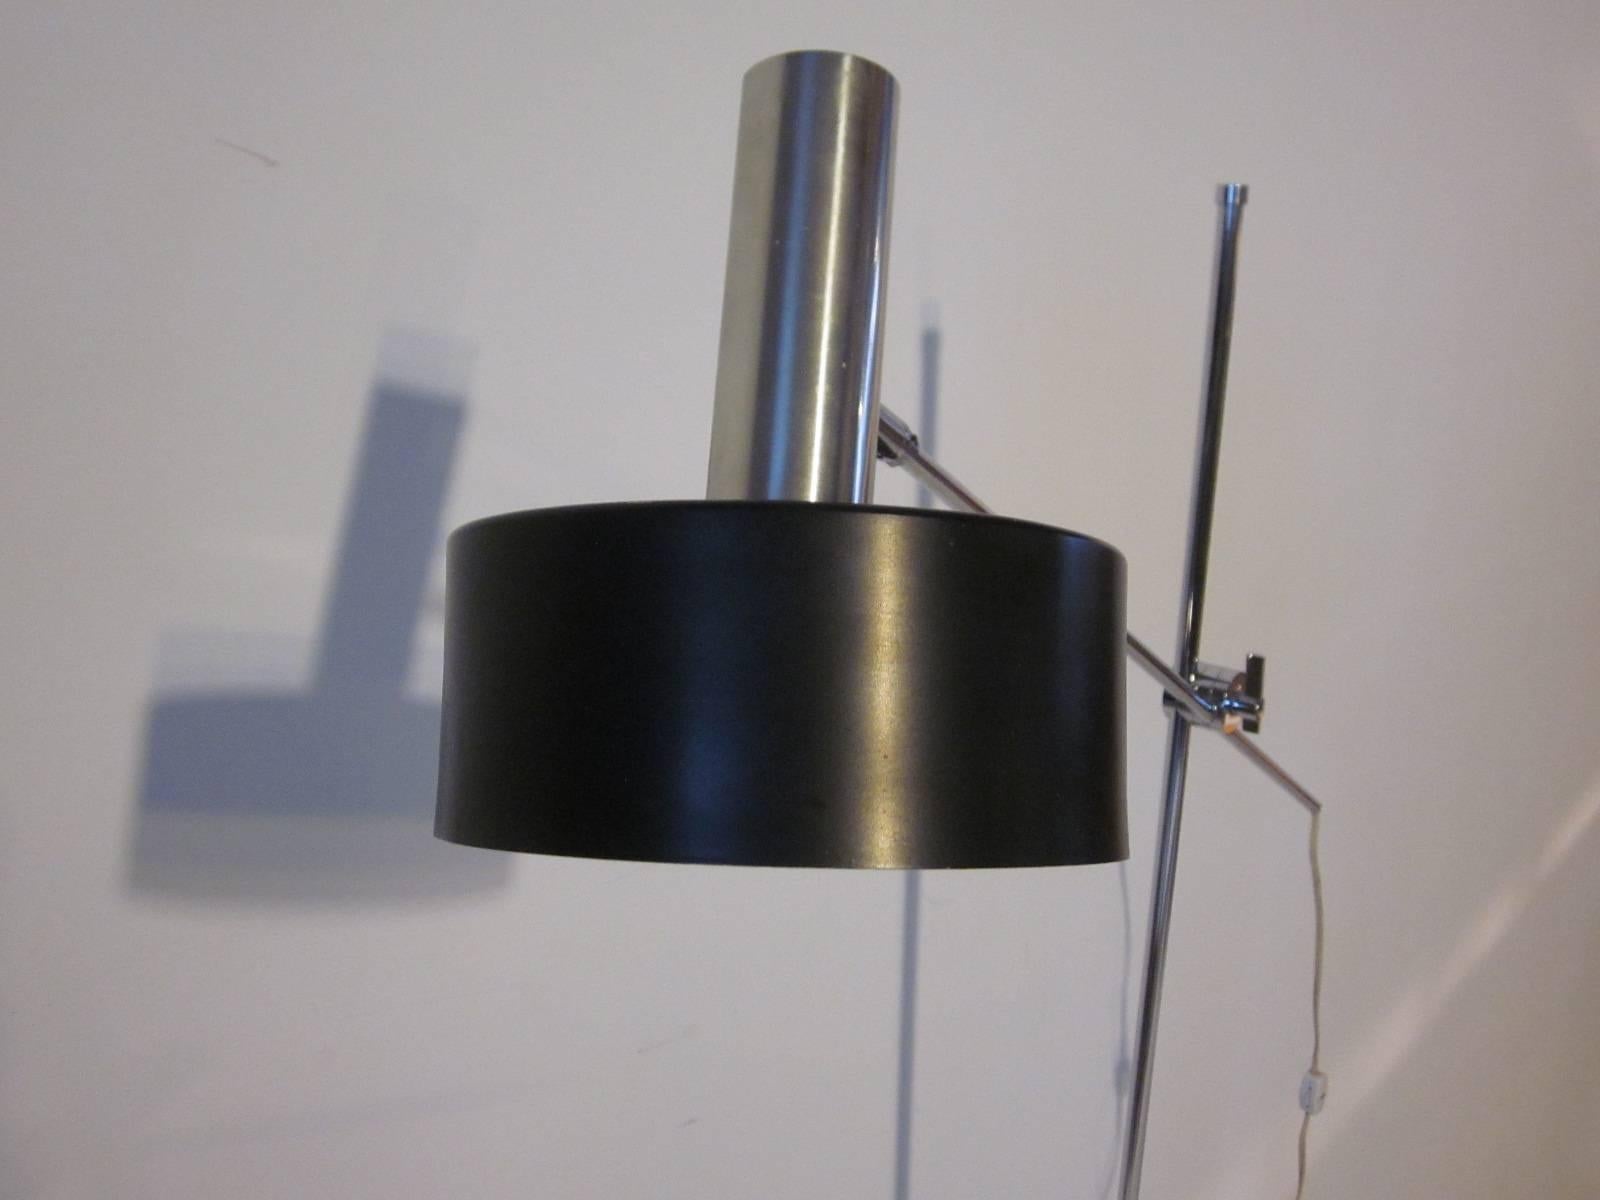 A chrome and satin black Italian styled floor lamp with adjustable height and reach of the shade and pivoting head, in the manner of Maria Pergay and manufactured by the Lightolier company.